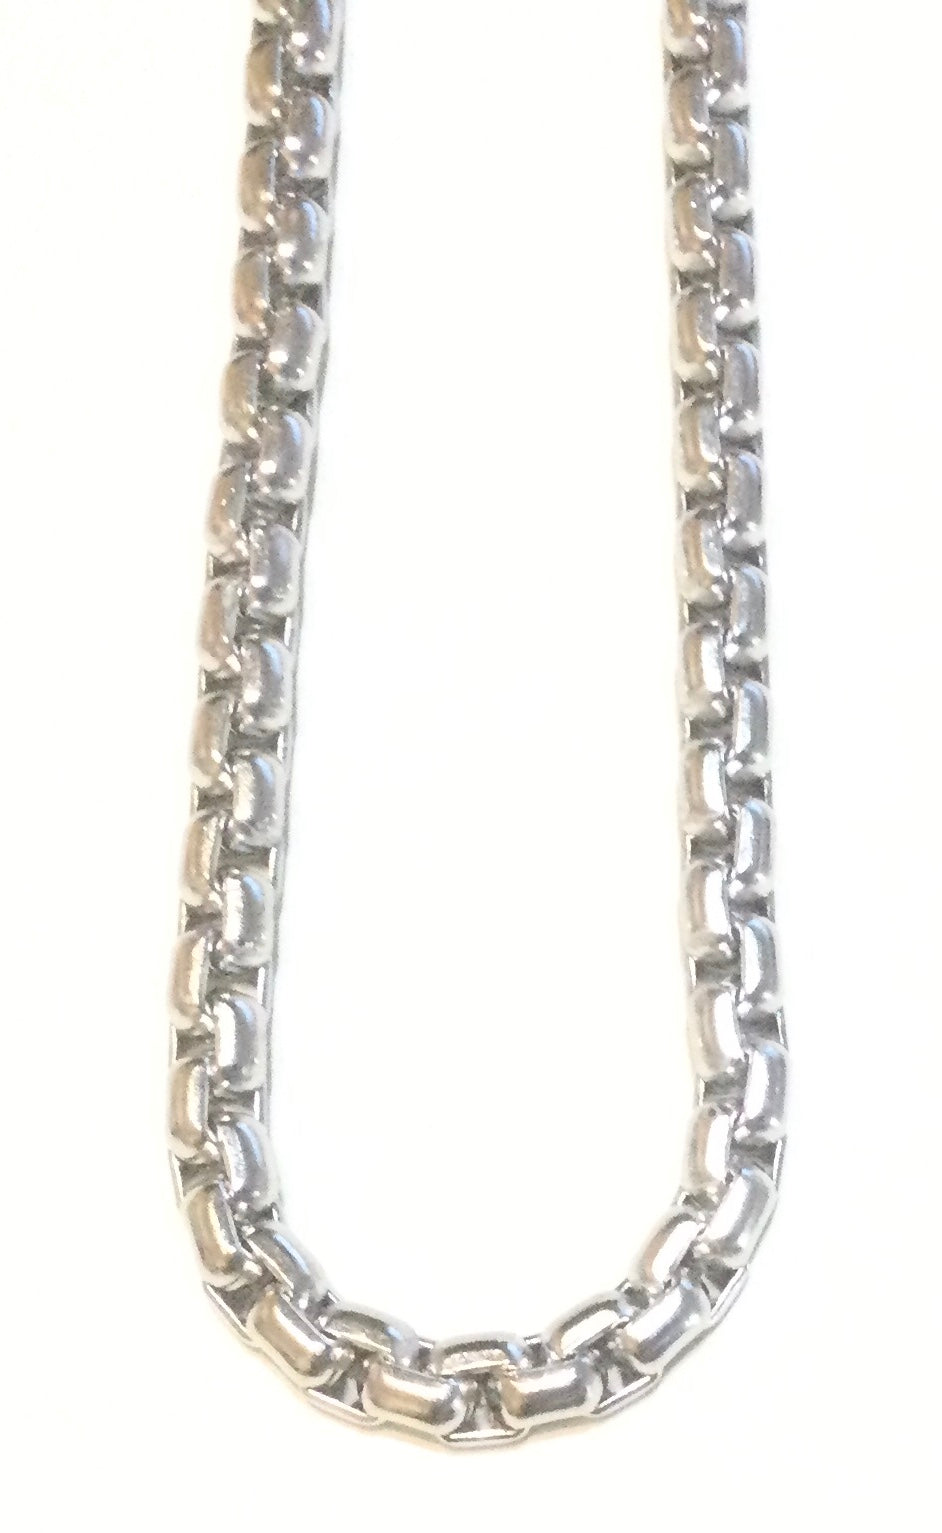 Urbiana Stainless Steel Chain Necklace